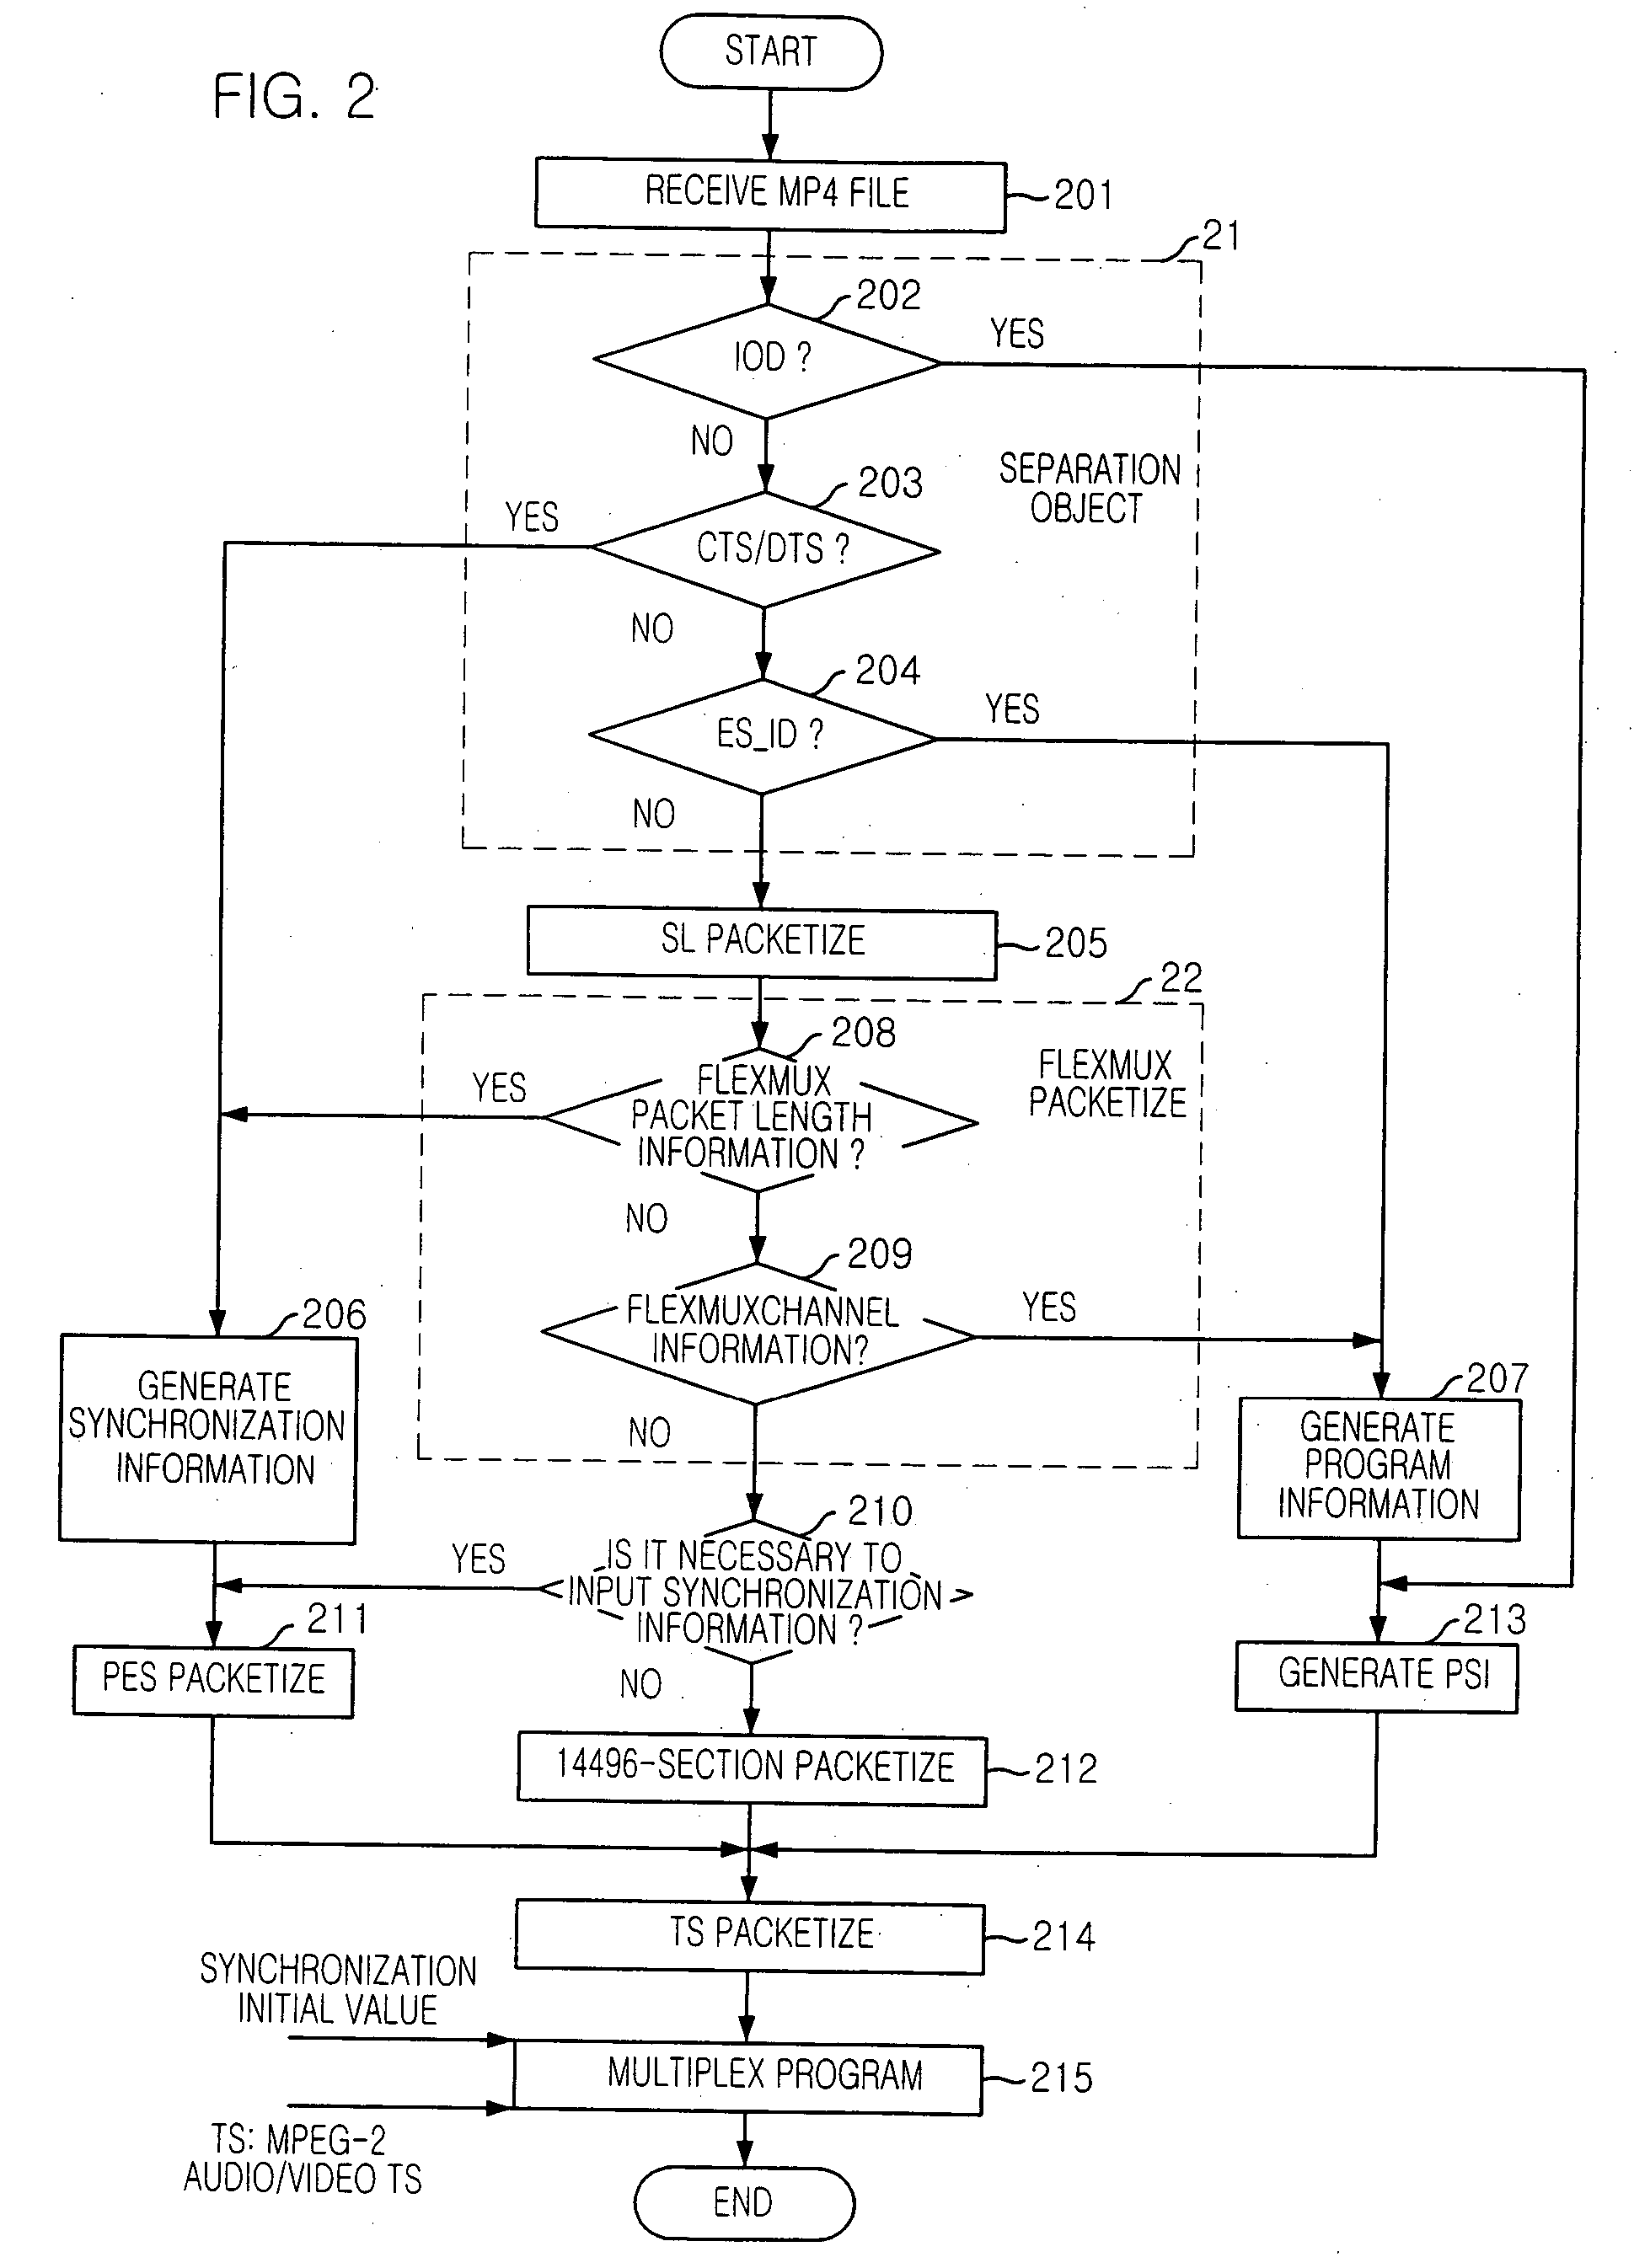 Apparatus and method for transmitting mpeg-4 data synchronized with mpeg-2 data